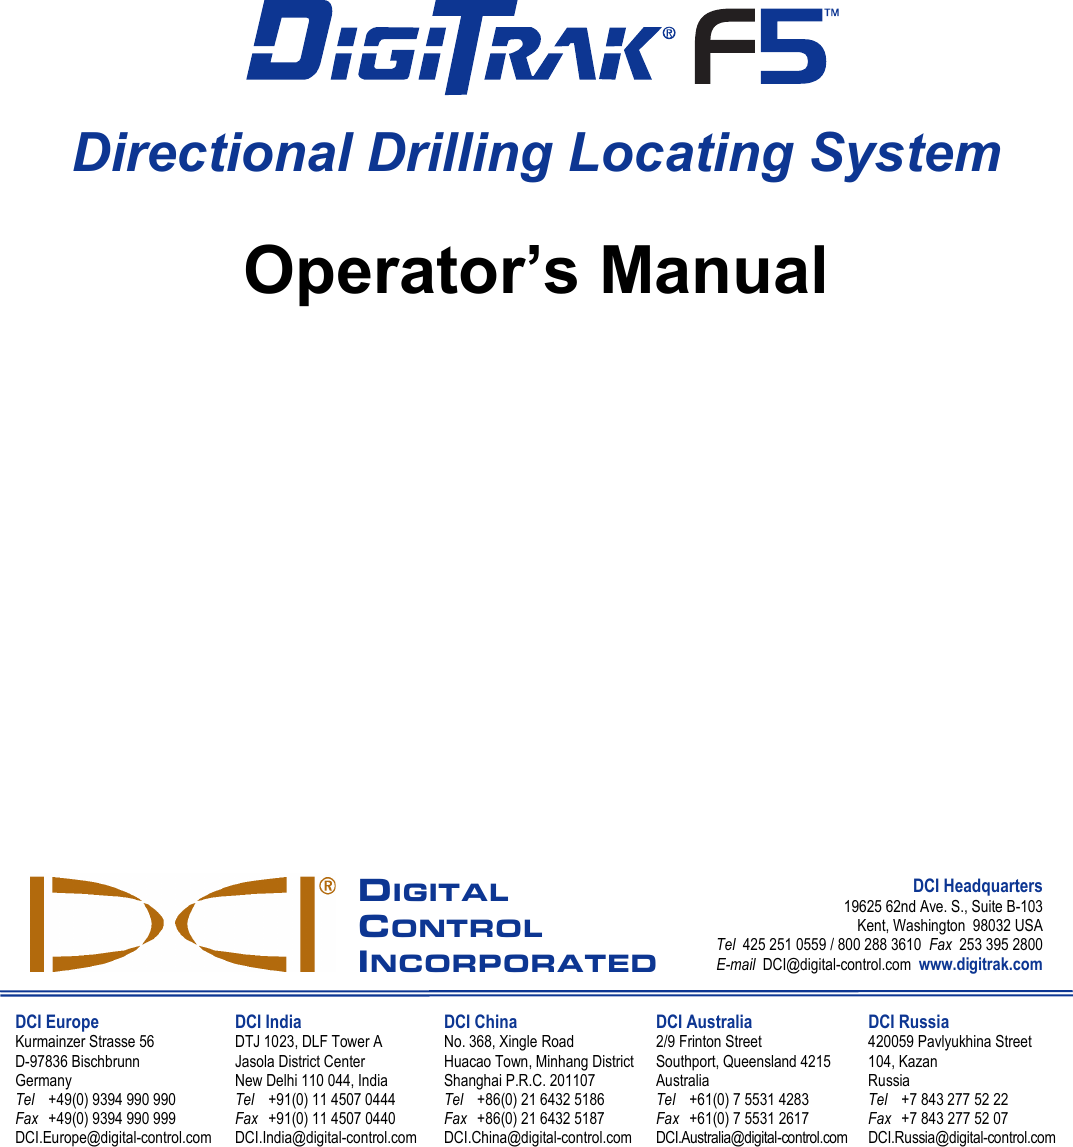                        Directional Drilling Locating System  Operator’s Manual                    DIGITAL CONTROL INCORPORATED DCI Headquarters 19625 62nd Ave. S., Suite B-103 Kent, Washington  98032 USA Tel  425 251 0559 / 800 288 3610  Fax  253 395 2800 E-mail  DCI@digital-control.com  www.digitrak.com  DCI Europe Kurmainzer Strasse 56 D-97836 Bischbrunn  Germany Tel +49(0) 9394 990 990 Fax +49(0) 9394 990 999 DCI.Europe@digital-control.com DCI India DTJ 1023, DLF Tower A Jasola District Center New Delhi 110 044, India Tel +91(0) 11 4507 0444 Fax +91(0) 11 4507 0440 DCI.India@digital-control.com DCI China No. 368, Xingle Road Huacao Town, Minhang District Shanghai P.R.C. 201107  Tel +86(0) 21 6432 5186 Fax +86(0) 21 6432 5187 DCI.China@digital-control.com DCI Australia 2/9 Frinton Street Southport, Queensland 4215 Australia Tel +61(0) 7 5531 4283 Fax +61(0) 7 5531 2617 DCI.Australia@digital-control.com DCI Russia 420059 Pavlyukhina Street  104, Kazan Russia Tel +7 843 277 52 22 Fax +7 843 277 52 07 DCI.Russia@digital-control.com   